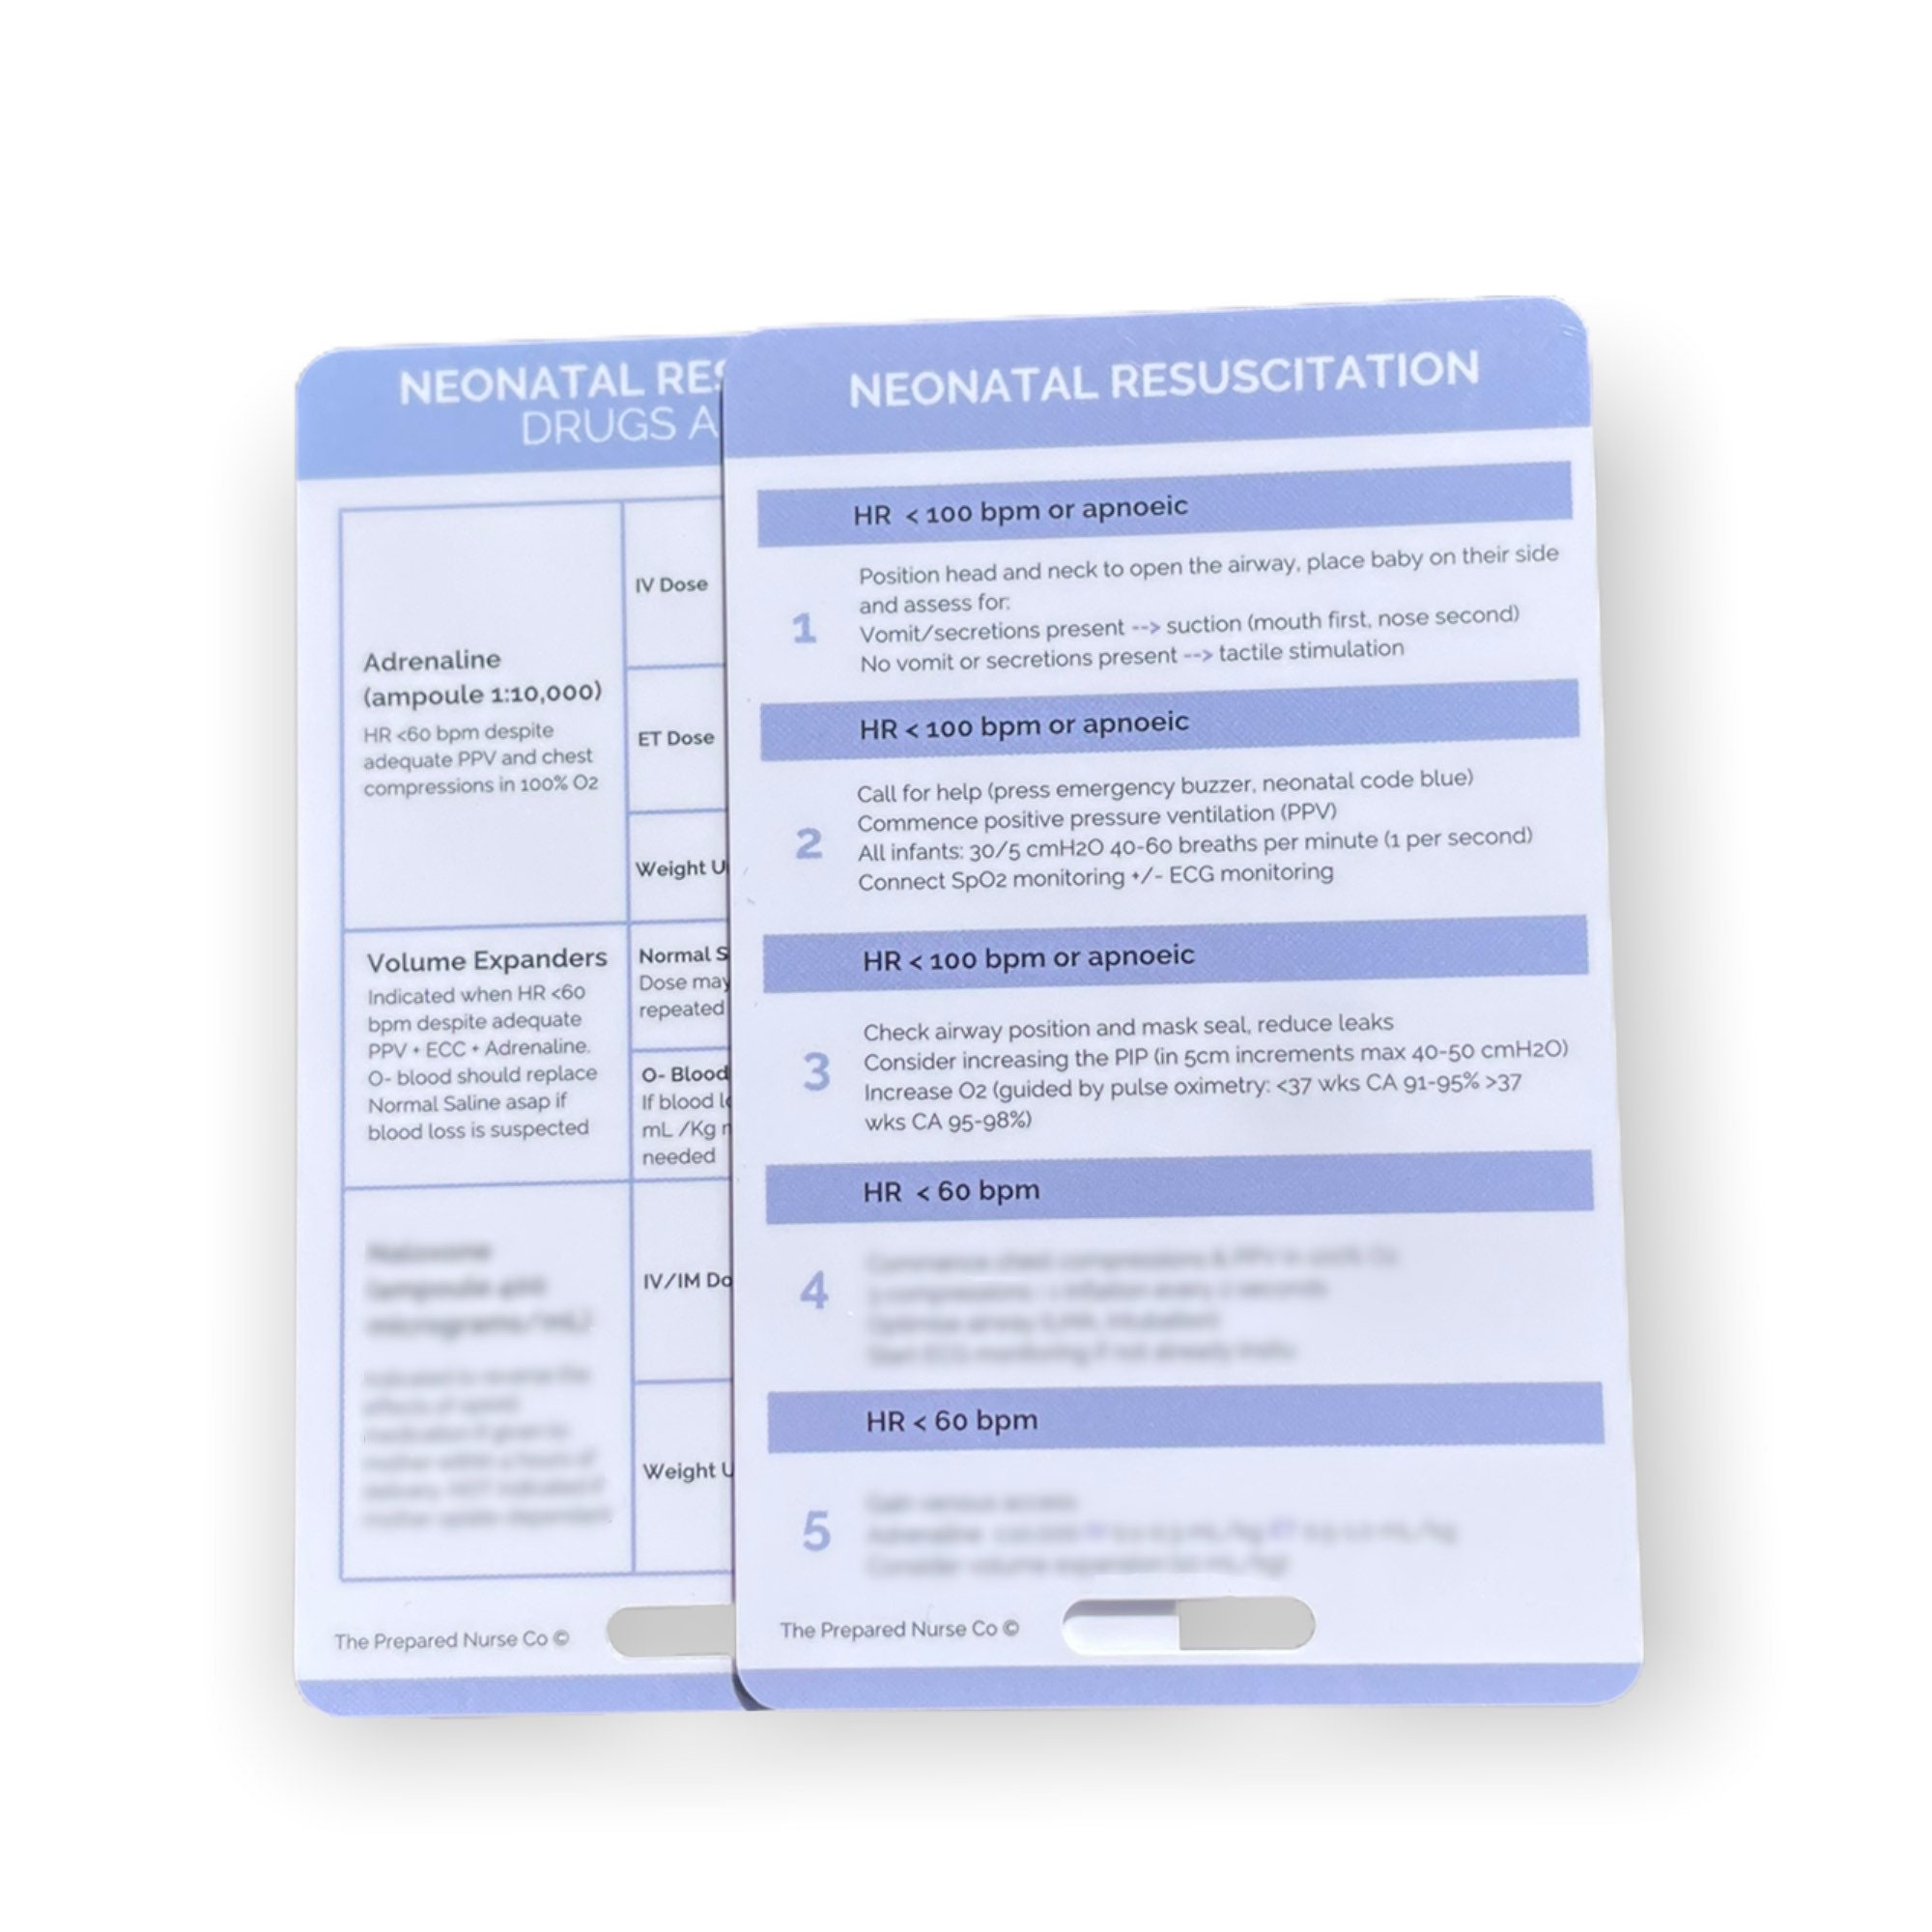 Neonatal Resuscitation and Resus Medication Guide Midwifery